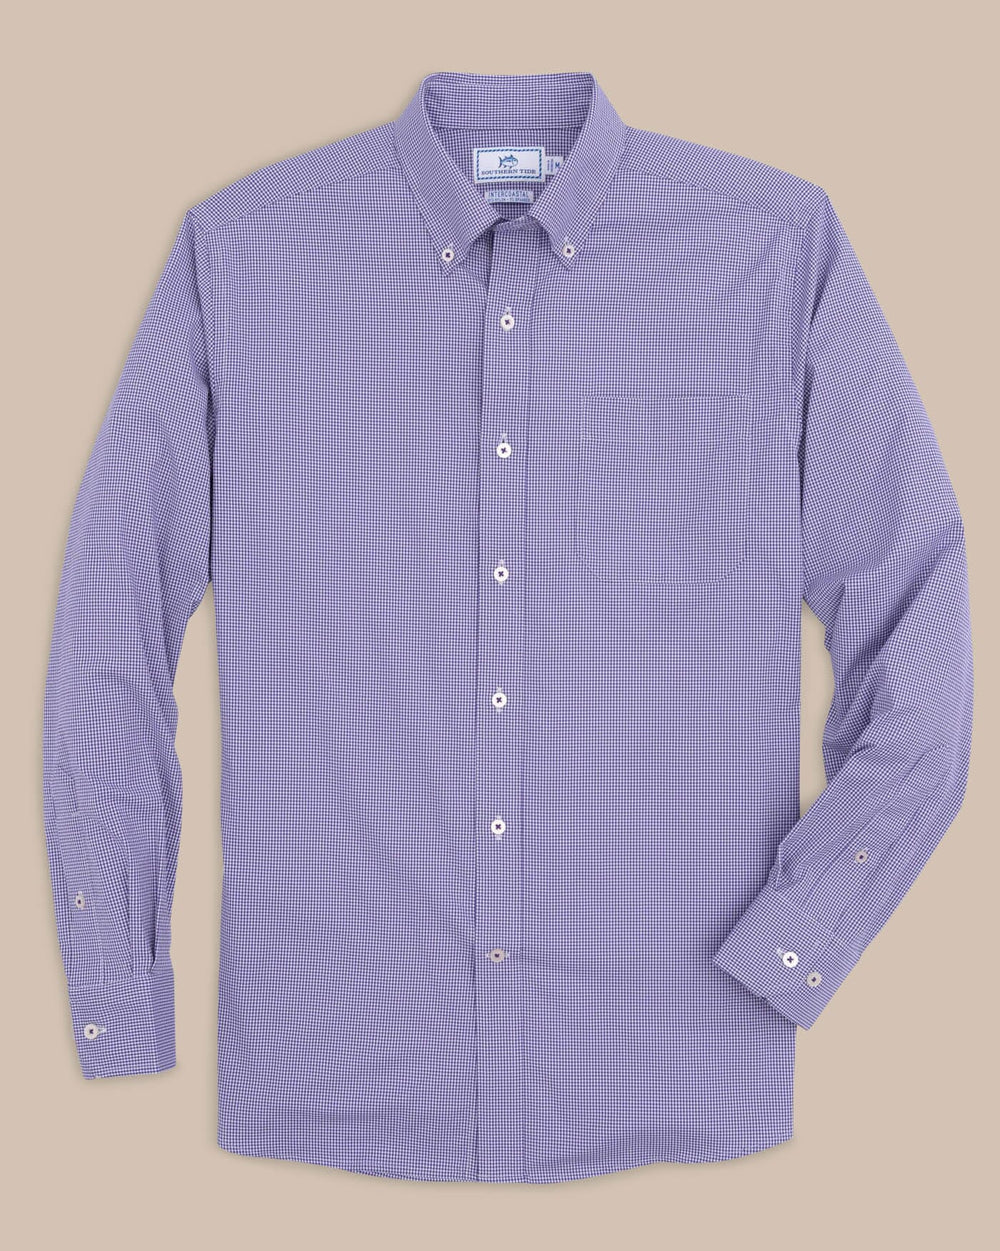 The front view of the Southern Tide Team Colors Gingham Intercoastal Sport Shirt by Southern Tide - Regal Purple